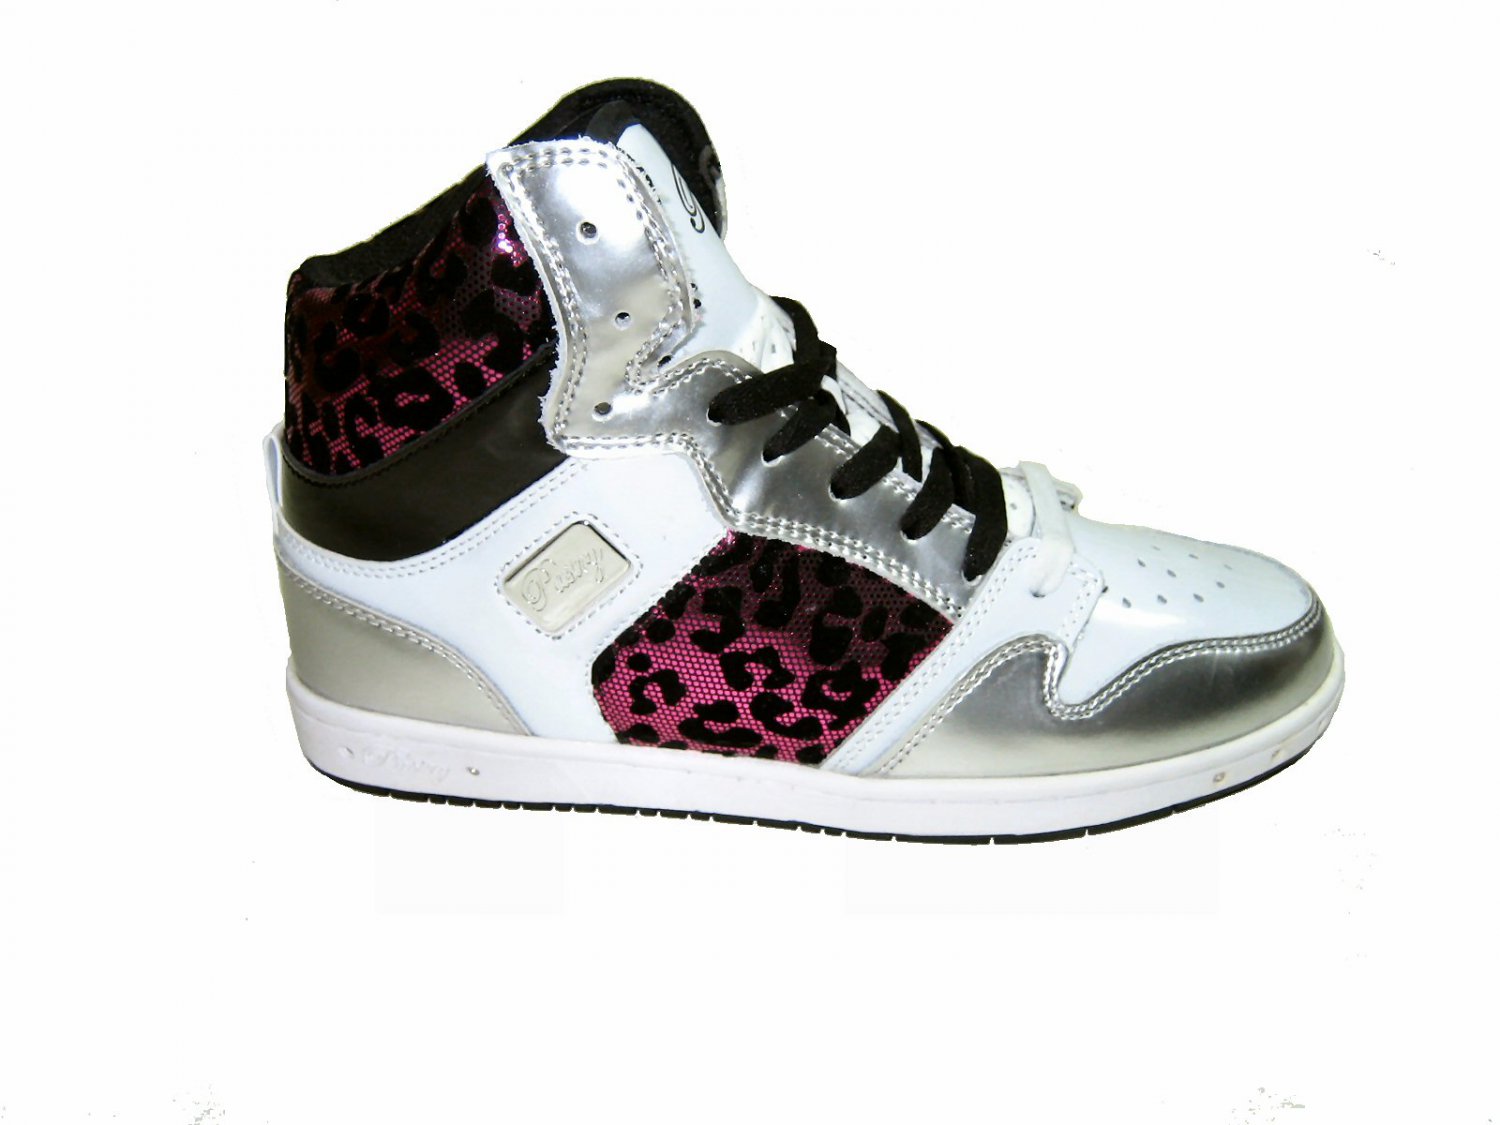 Pastry Glam Pie foil cheetah women's athletic high top sneakers white ...